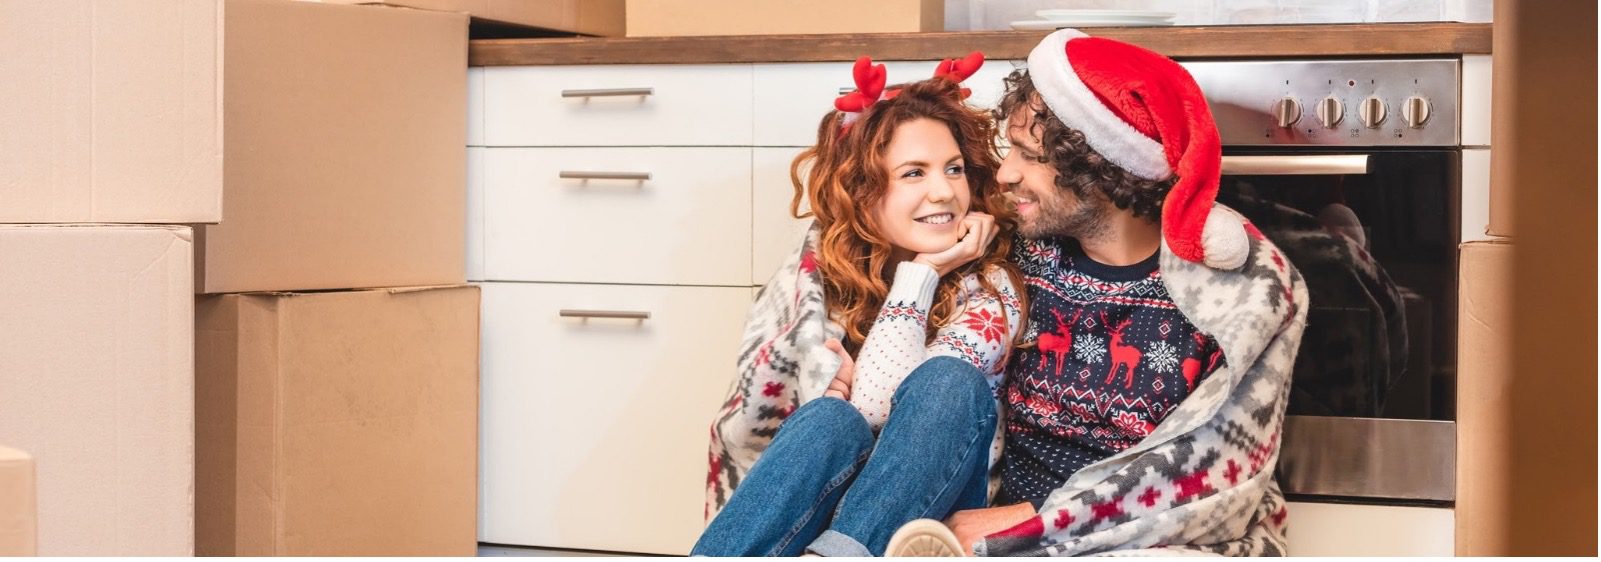 A man and woman sat down on the floor of a kitchen wearing Christmas hats.